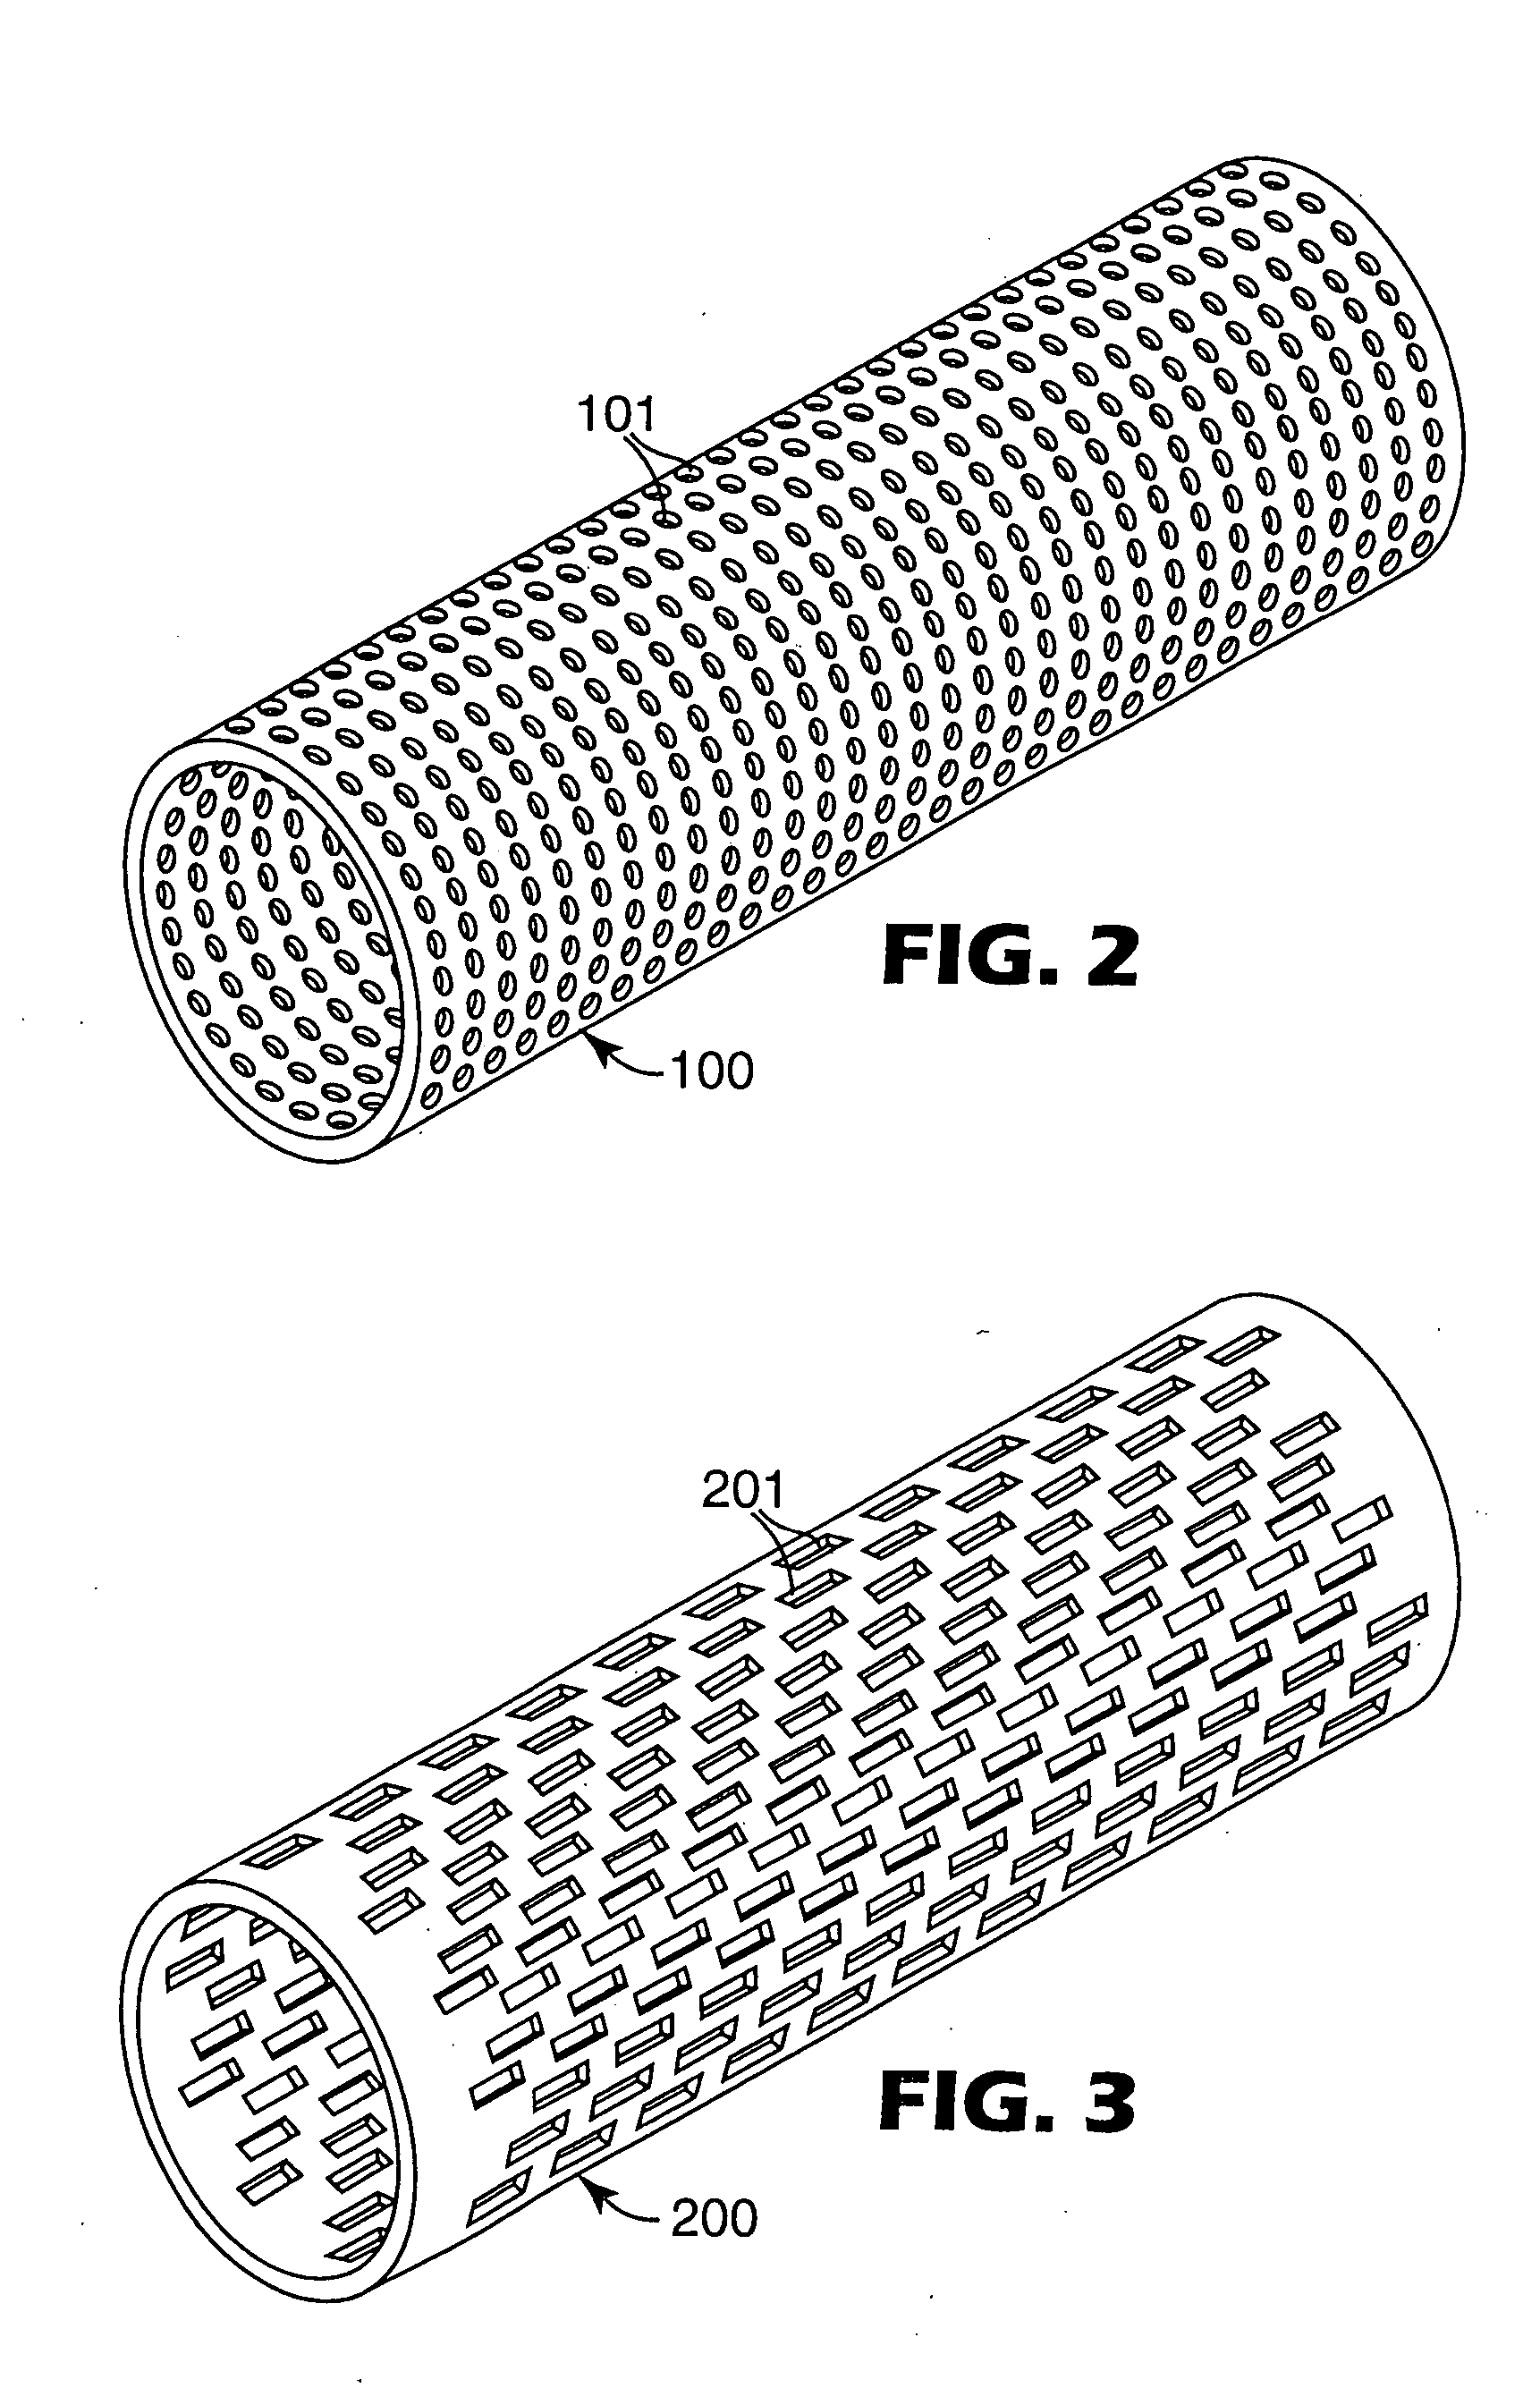 Abrasive product, method of making and using the same, and apparatus for making the same